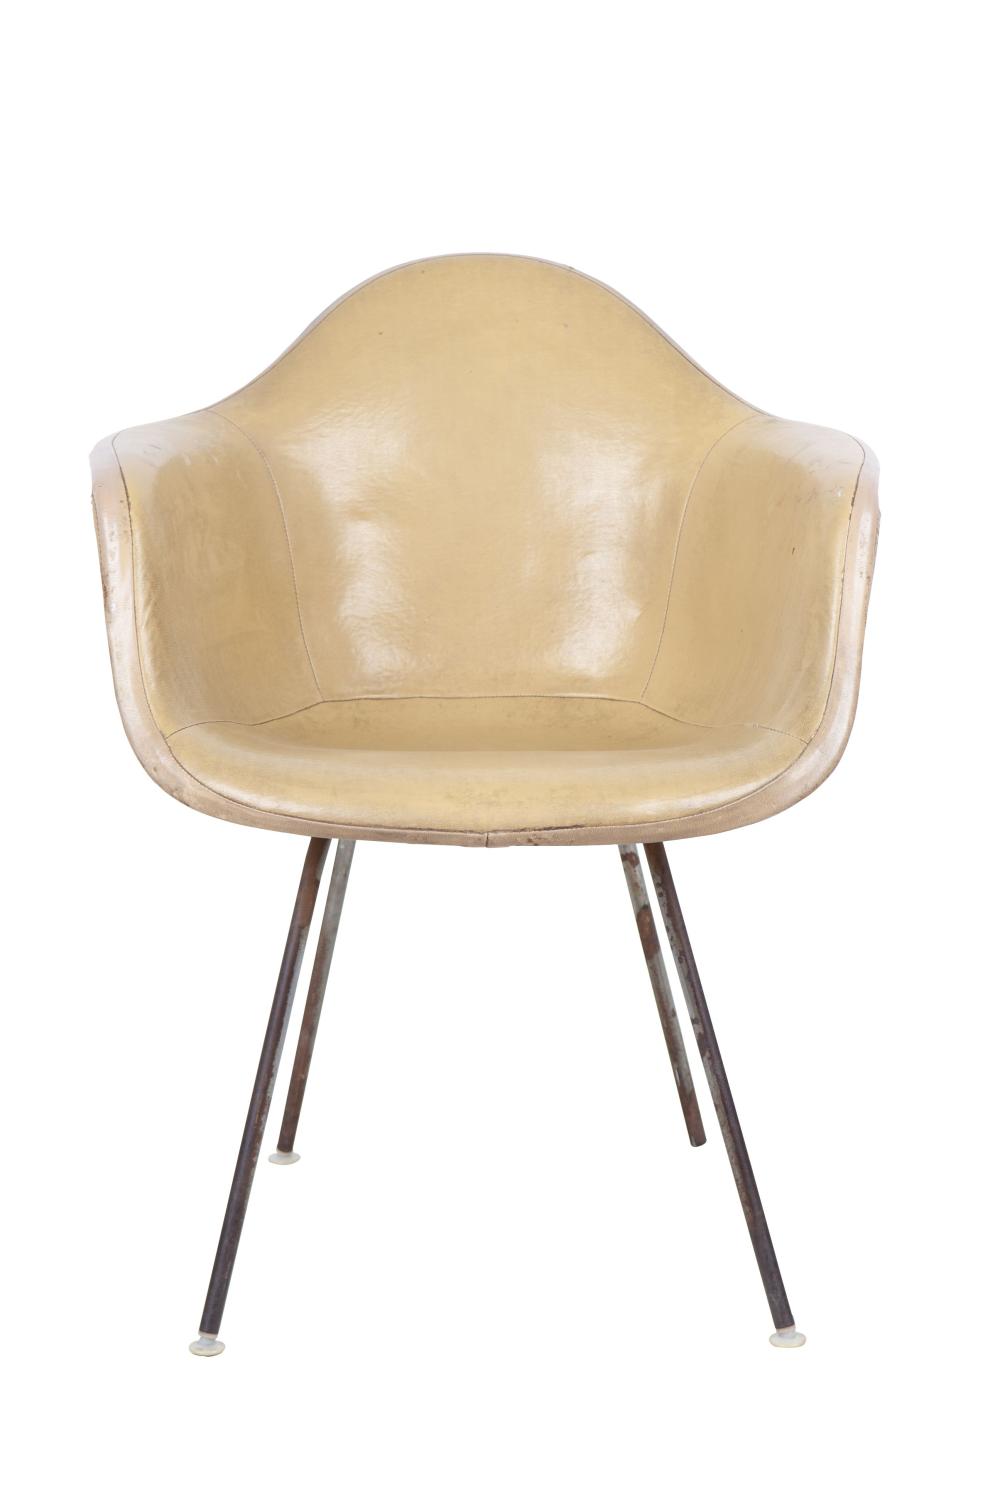 EAMES STYLE LEATHER-WRAPPED FIBERGLASS